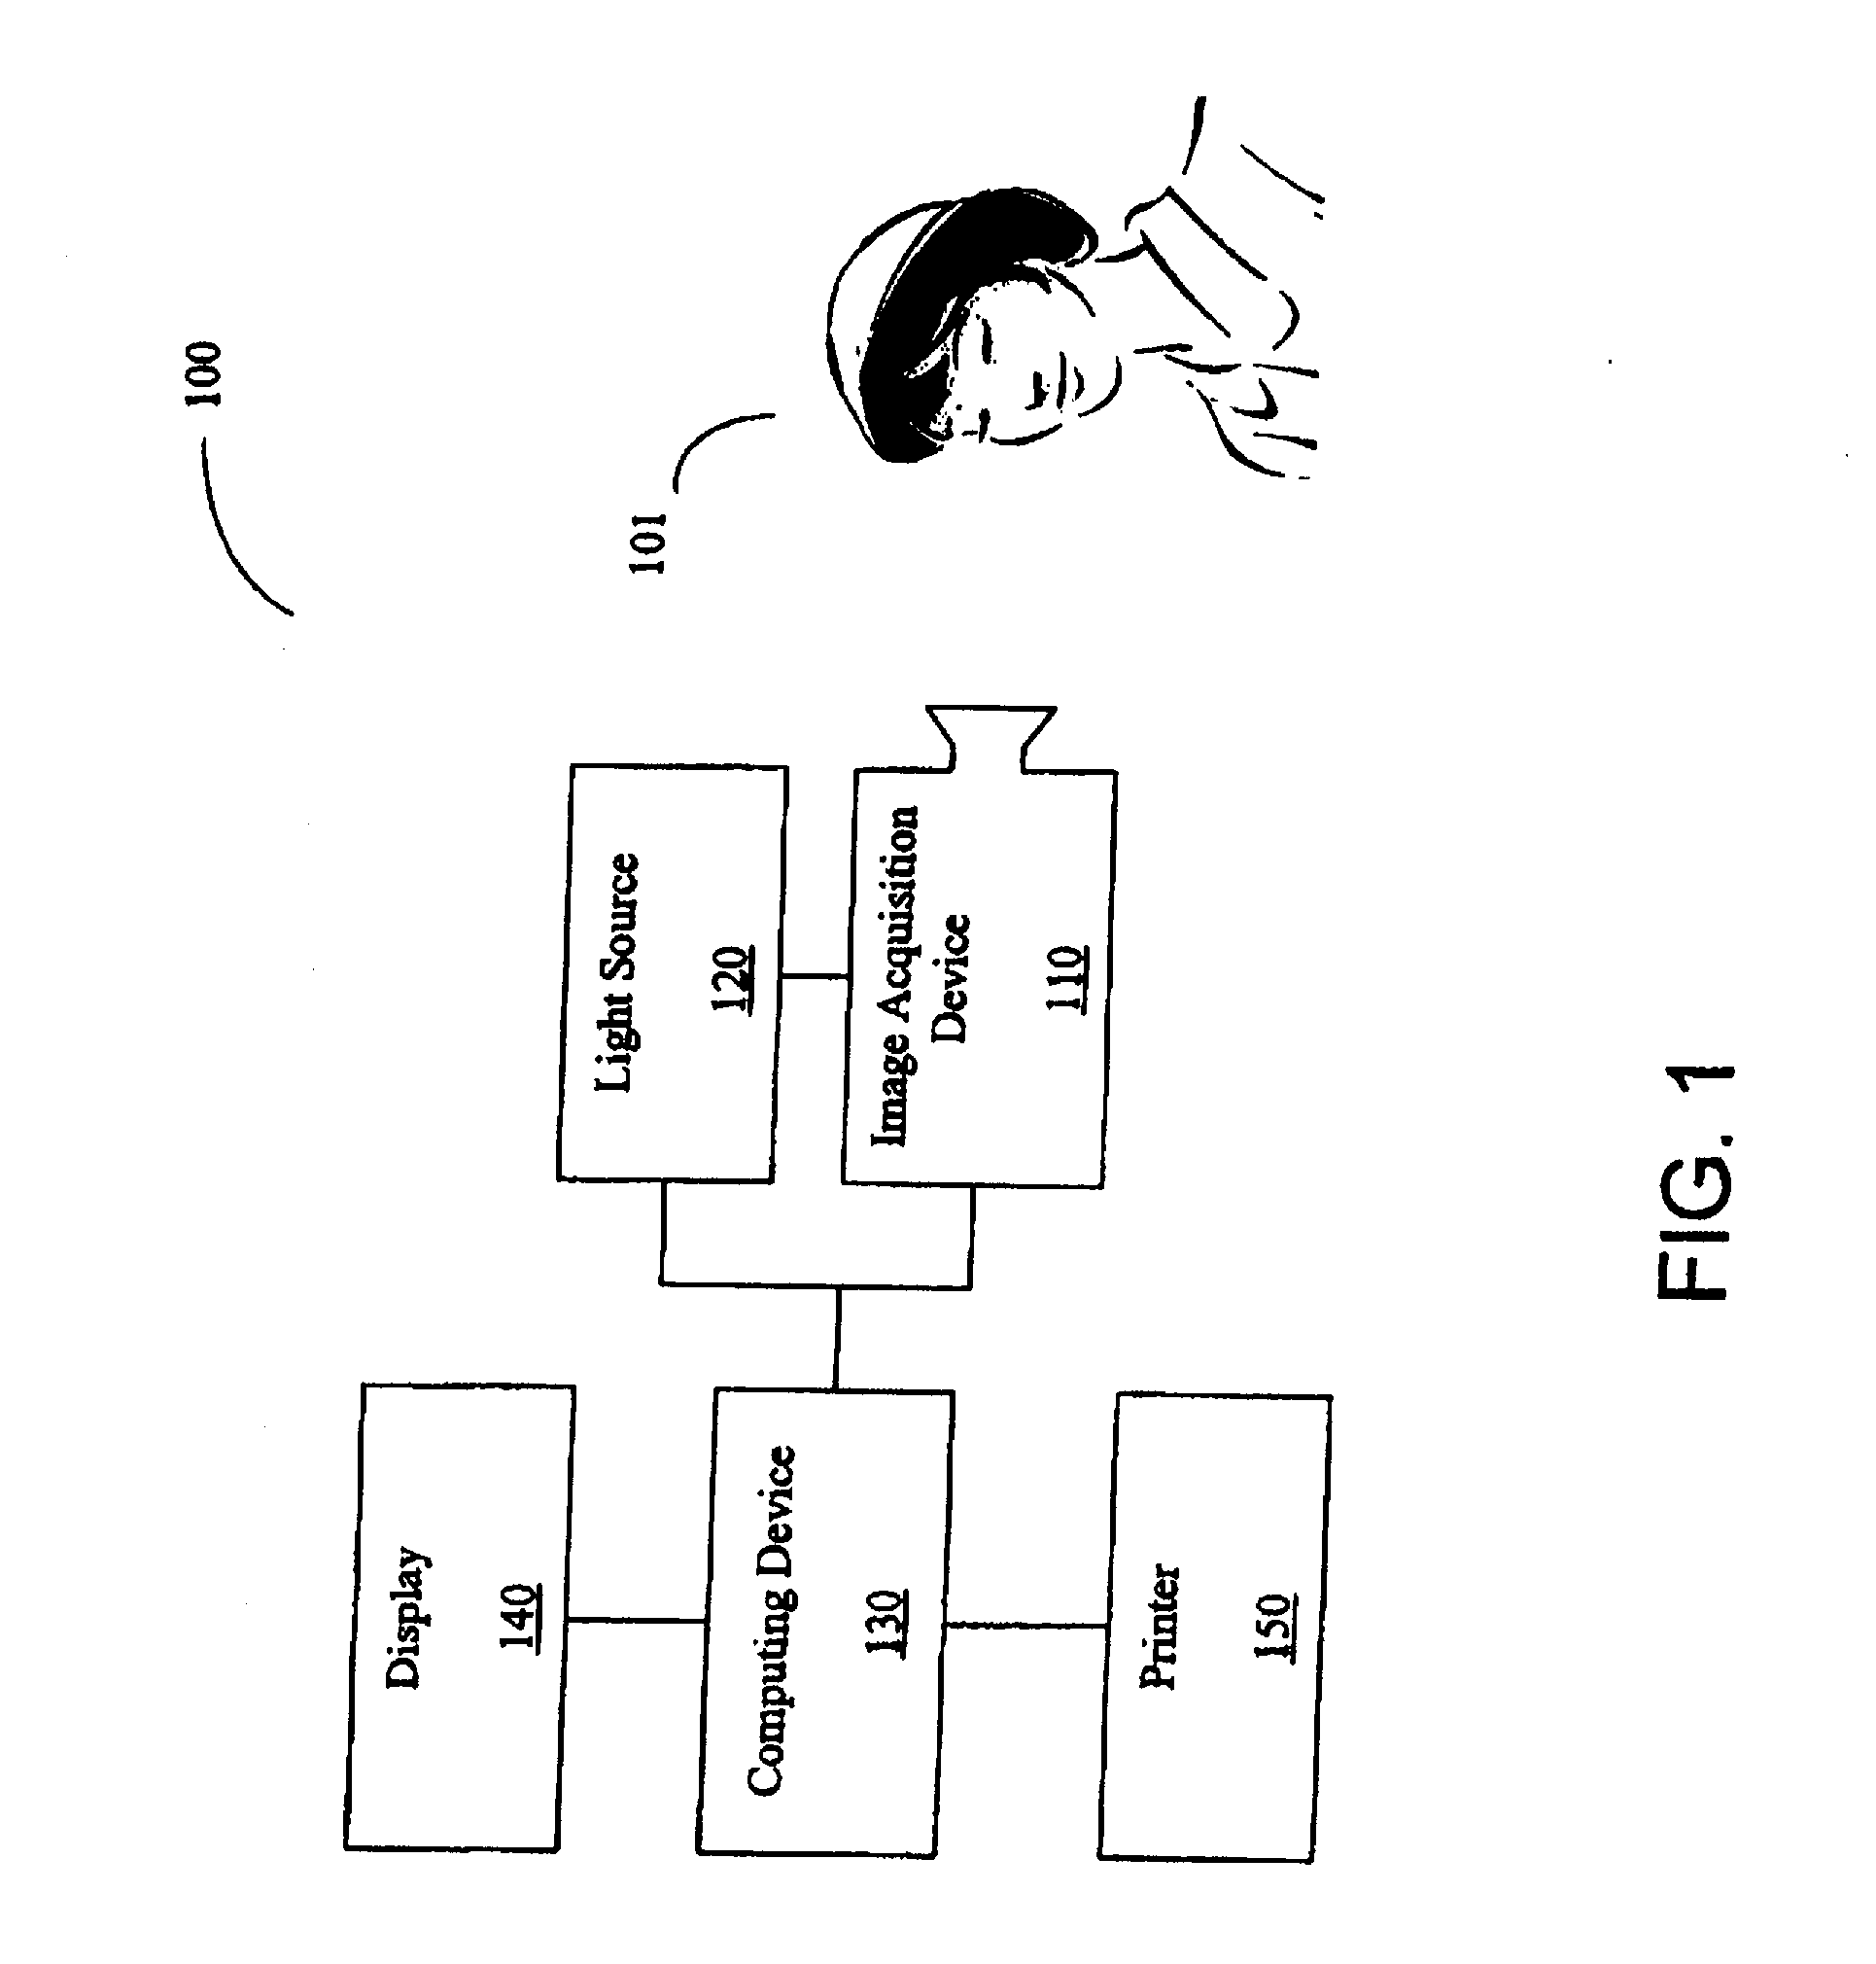 Method and System for Analyzing Physical Conditions Using Digital Images